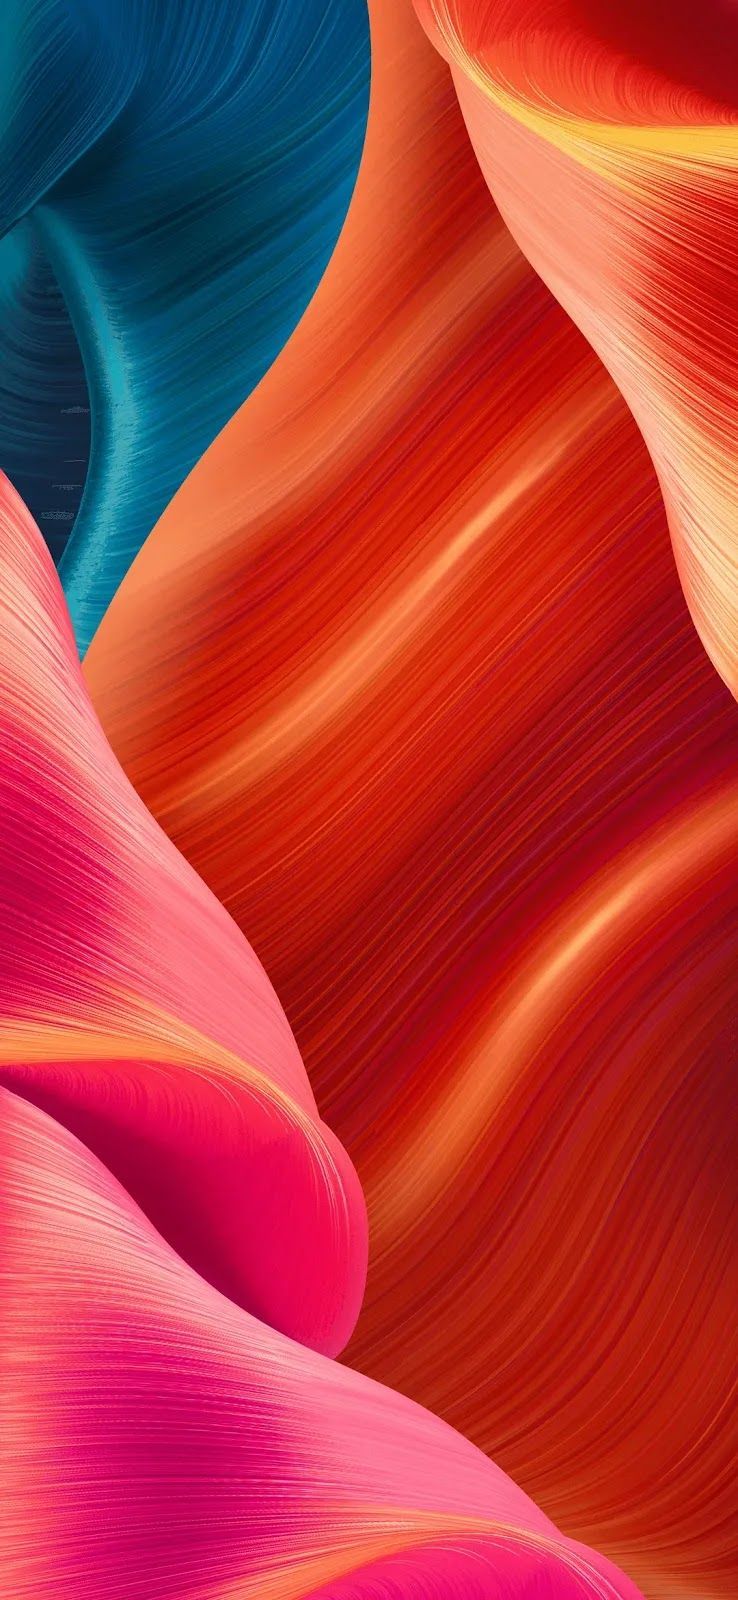 Realme 6 Pro Stock Wallpaper HD Download Bunny% Genuine Info. Smartphone wallpaper, Abstract iphone wallpaper, iPhone homescreen wallpaper